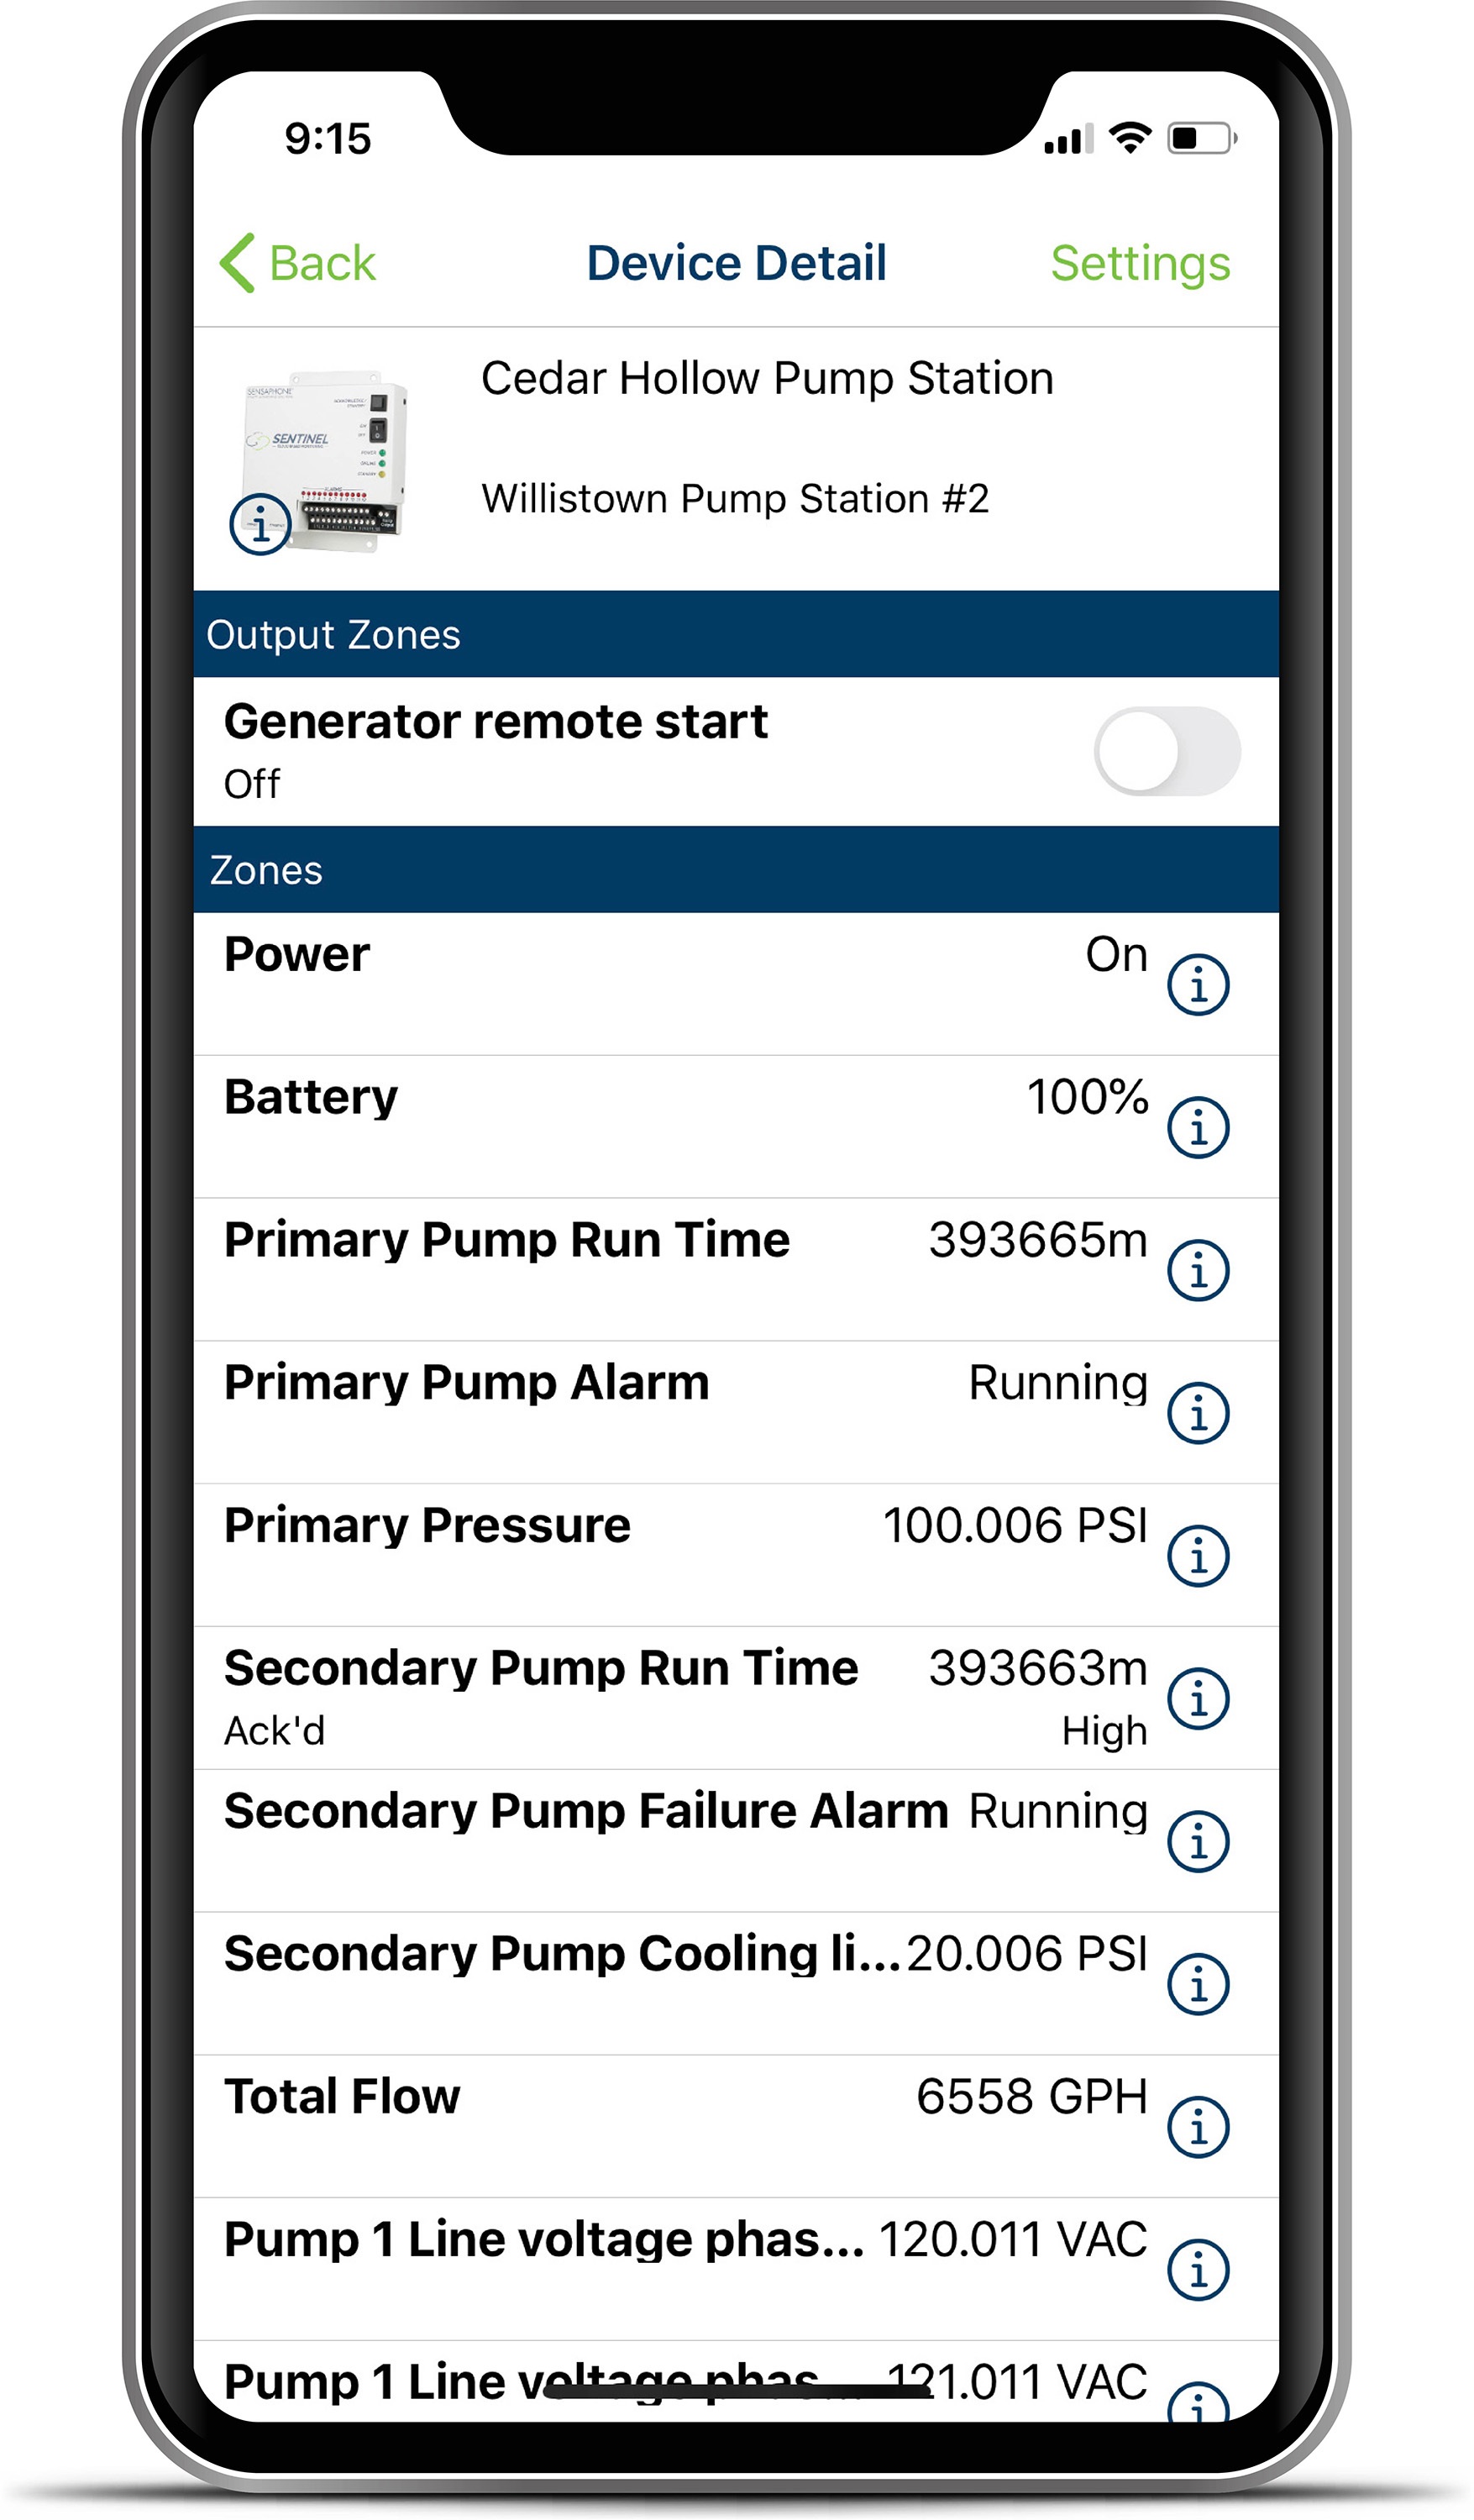 The system immediately notifies users when sensor readings move outside of pre-set parameters, which can indicate potential threats to pumps and systems.